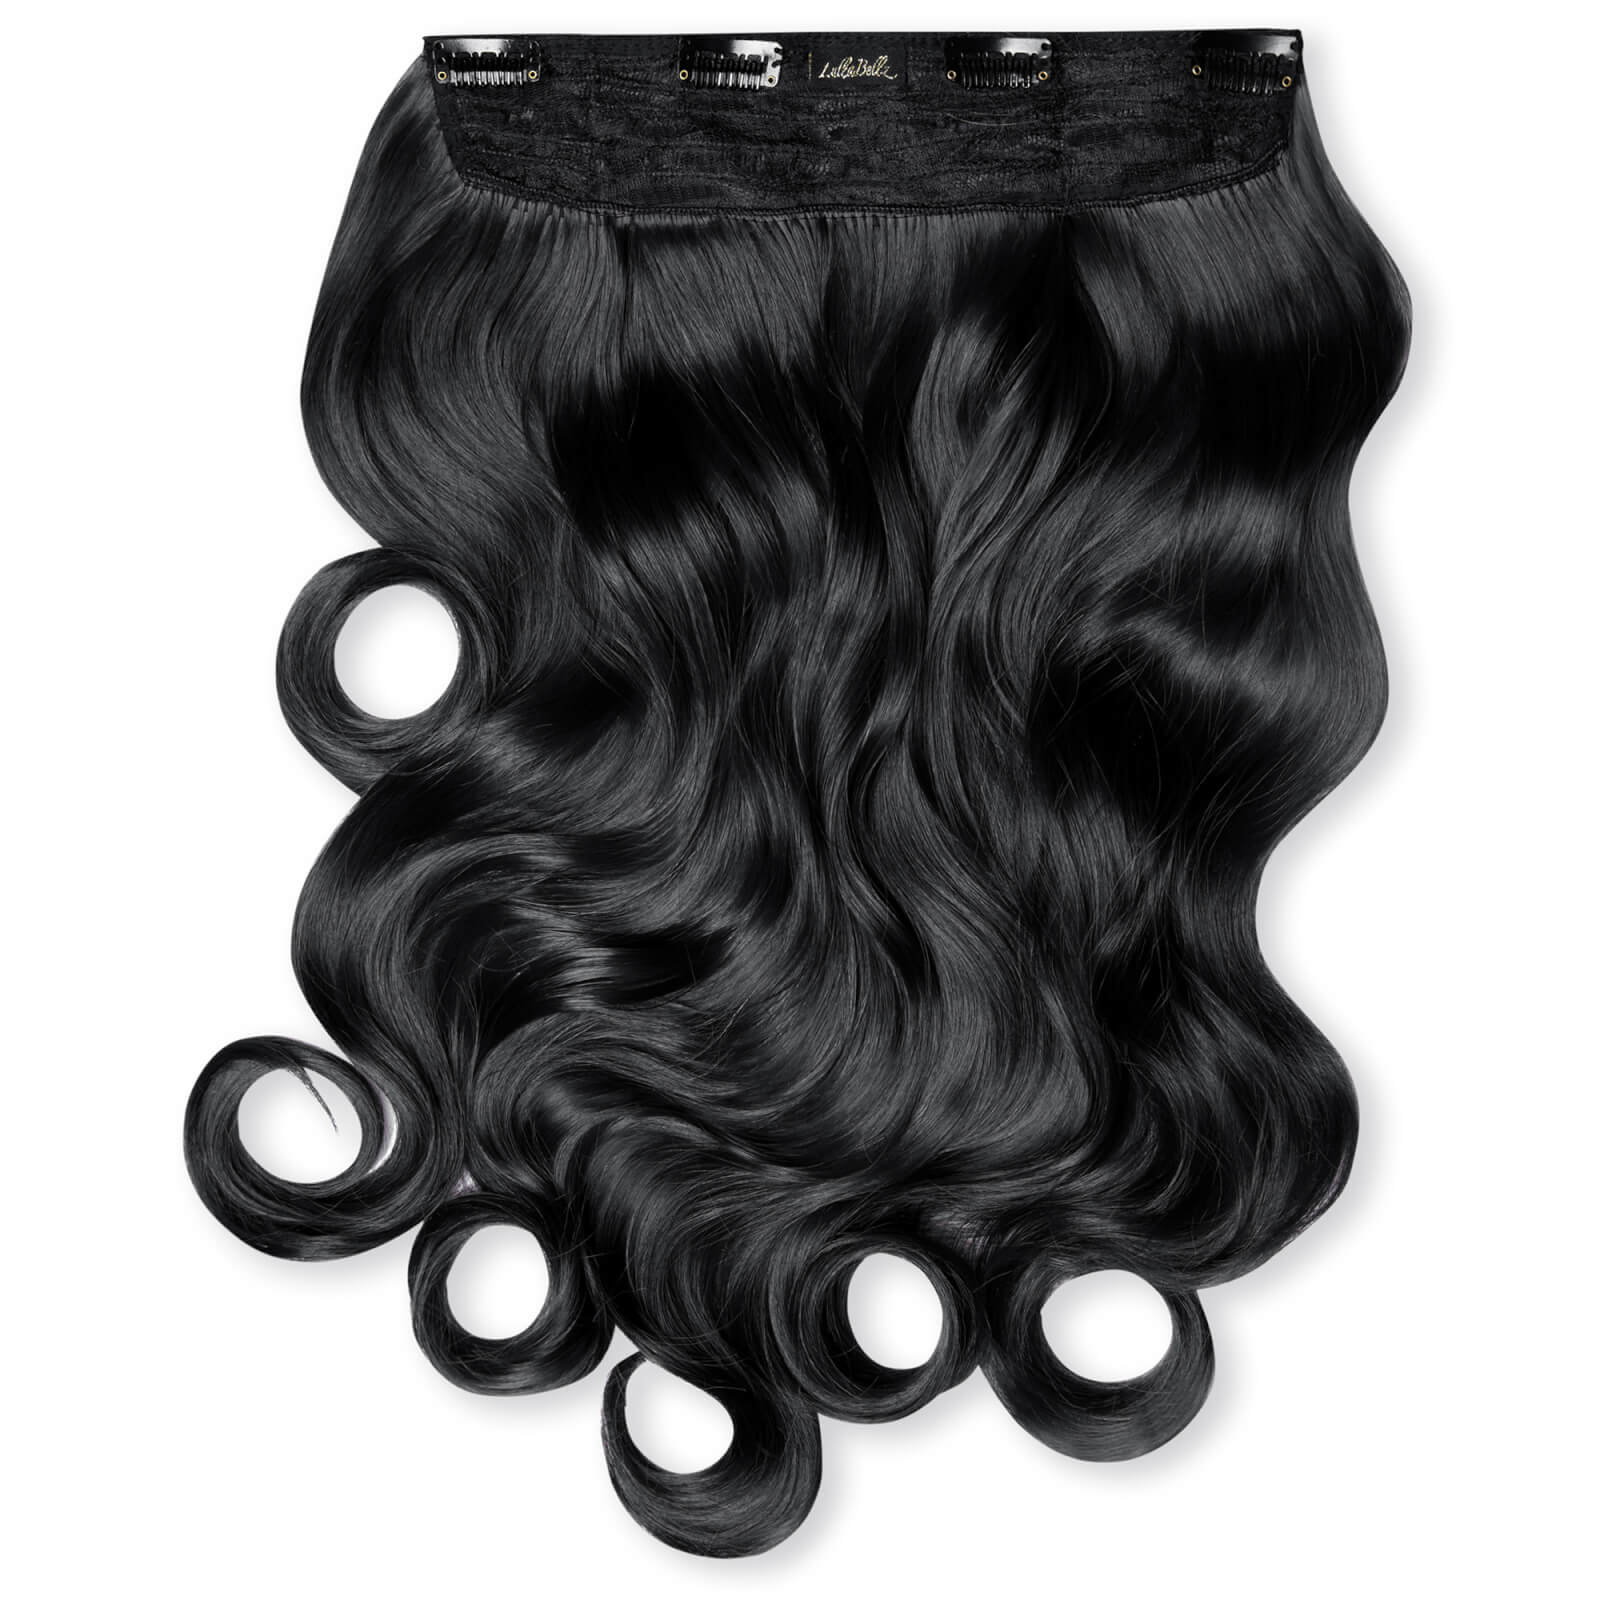 LullaBellz Thick 20 1-Piece Curly Clip in Hair Extensions (Various Colours) - Jet Black